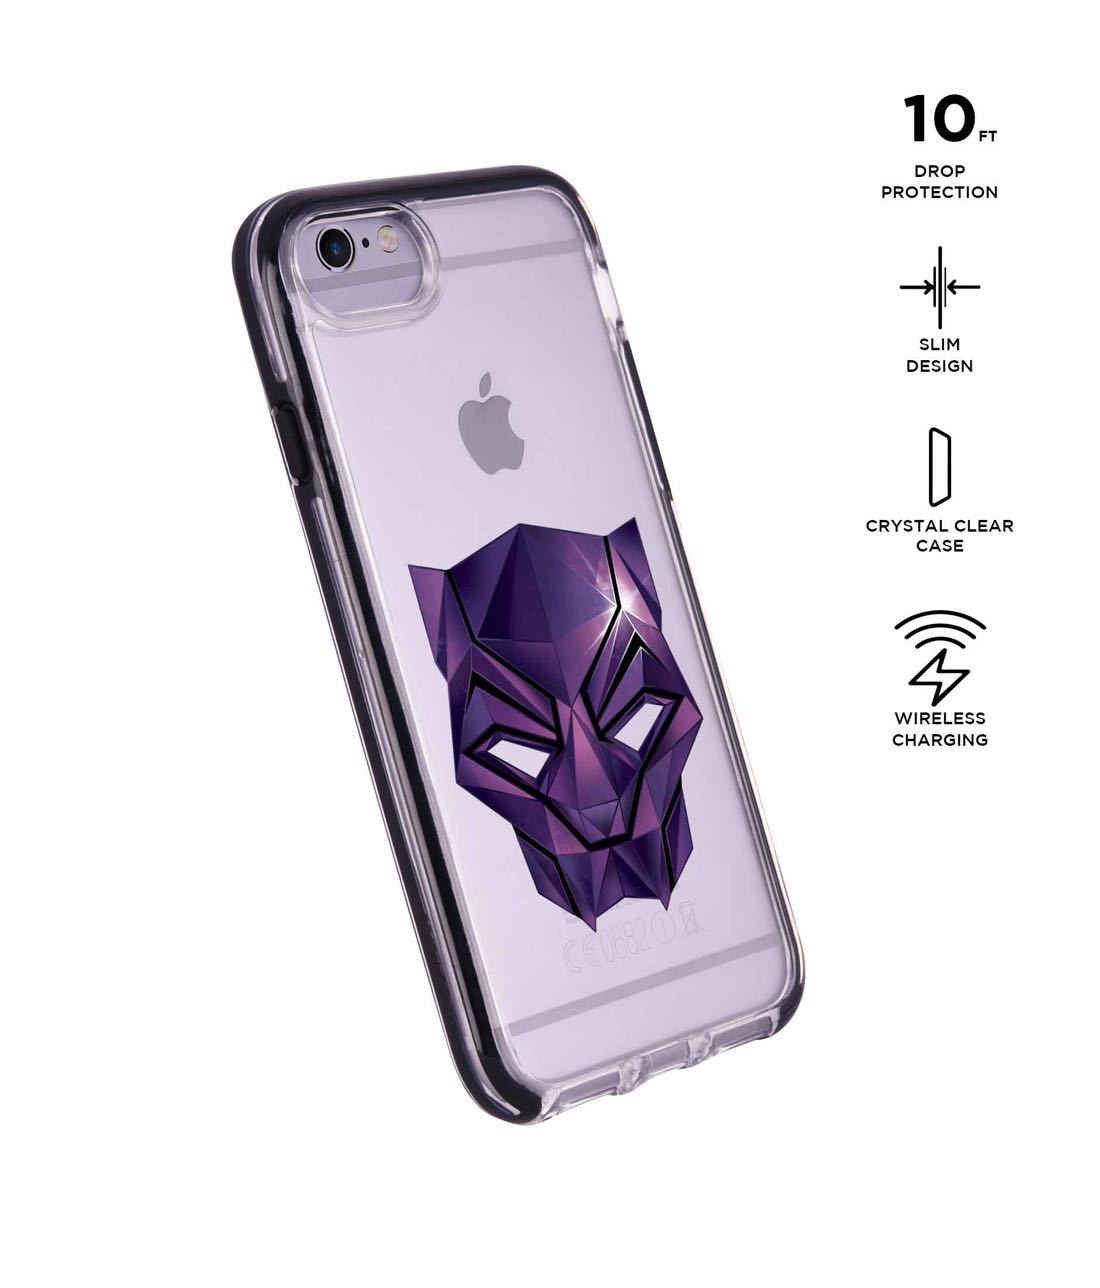 Black Panther Logo - Extreme Phone Case for iPhone 6 Plus